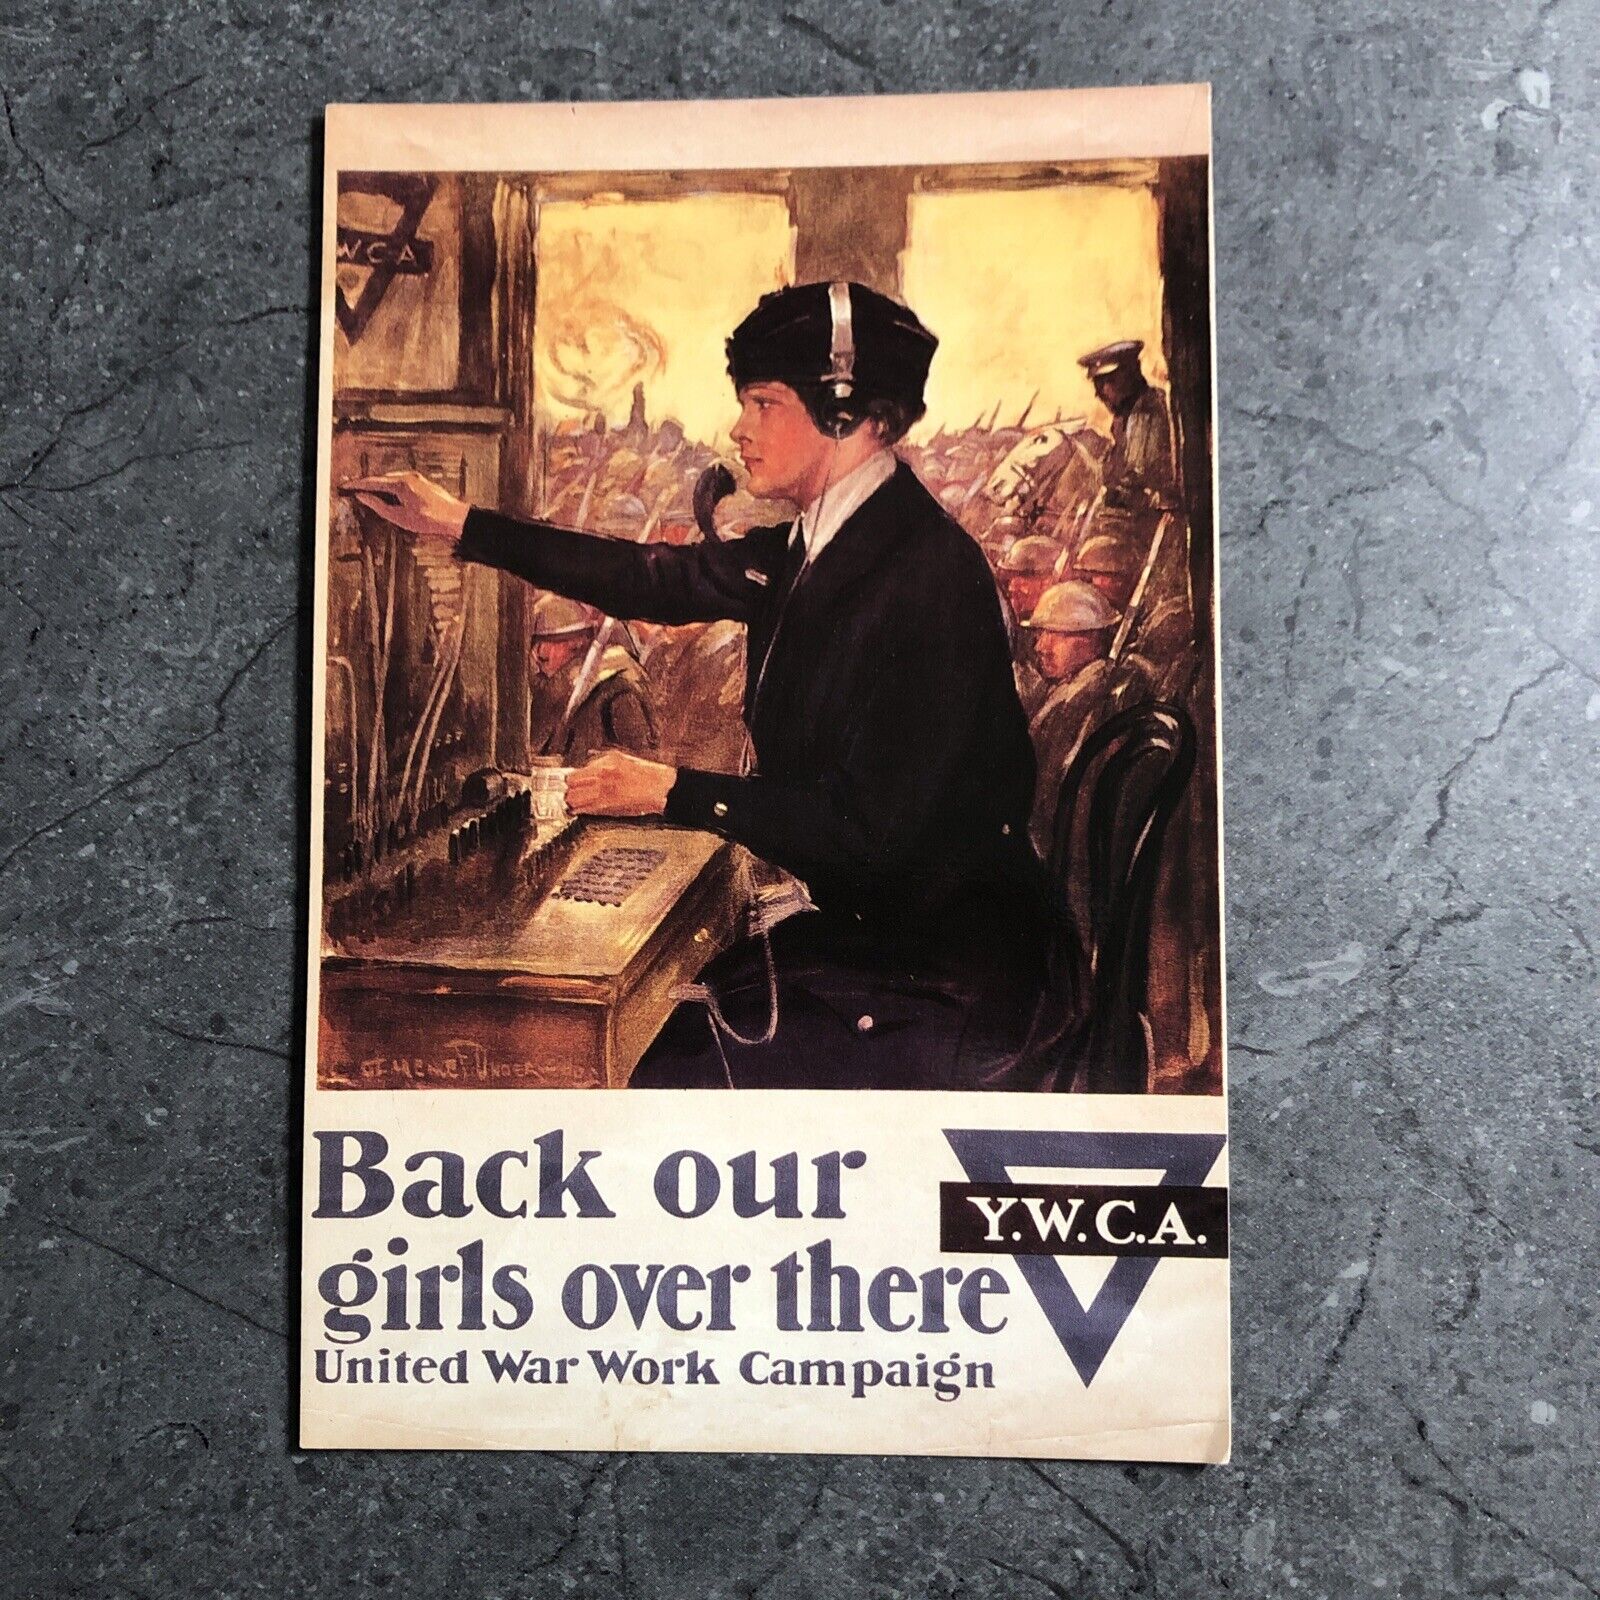 Back Our Girls Over There United War Work Y.W.C.A. Campaign 1992 Postcard